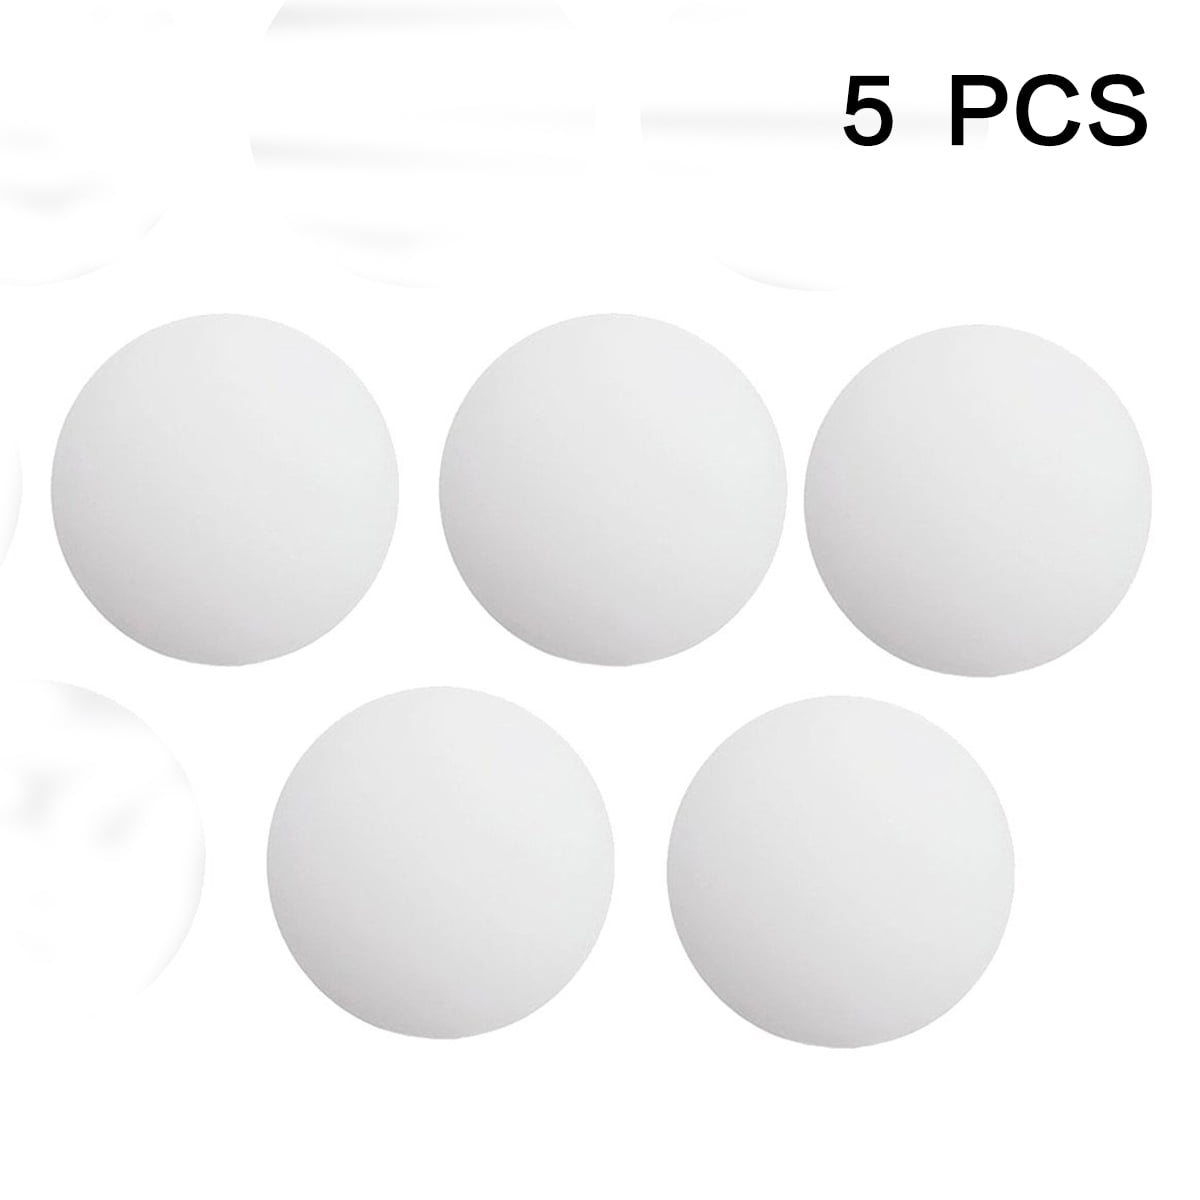 Plus 5 Clear Rubber Door Stopper Knob Handle Protectors. 10 pcs . Strongest Wall Door Stop Set- 5 Pieces of White Soft Silicone Bumpers Wall Guard 